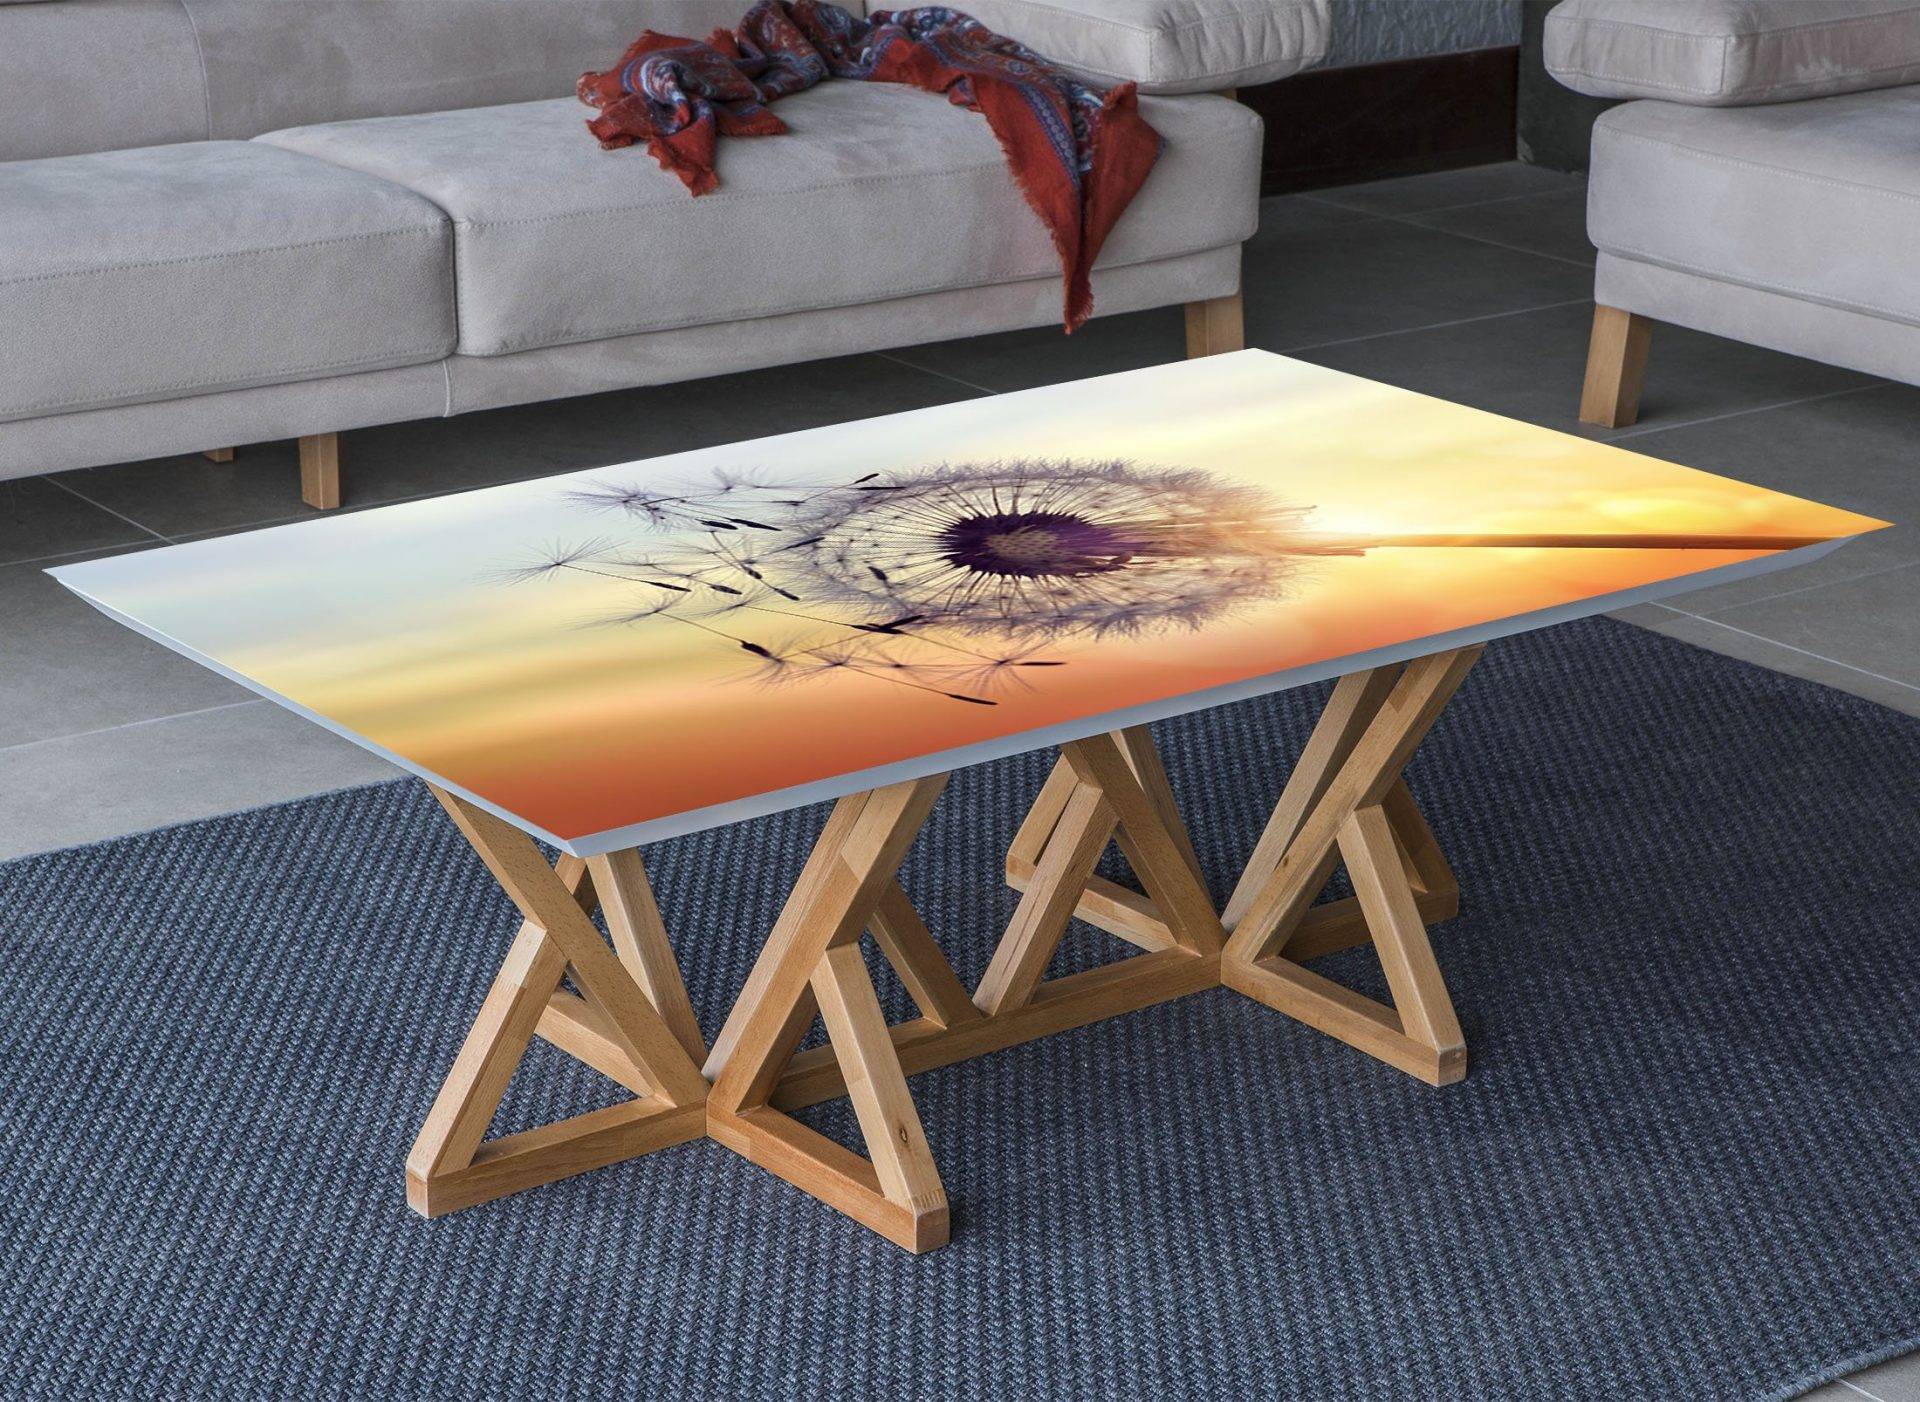 Dandelion Sunset View Laminated Vinyl Cover Self-Adhesive for Desk and Tables